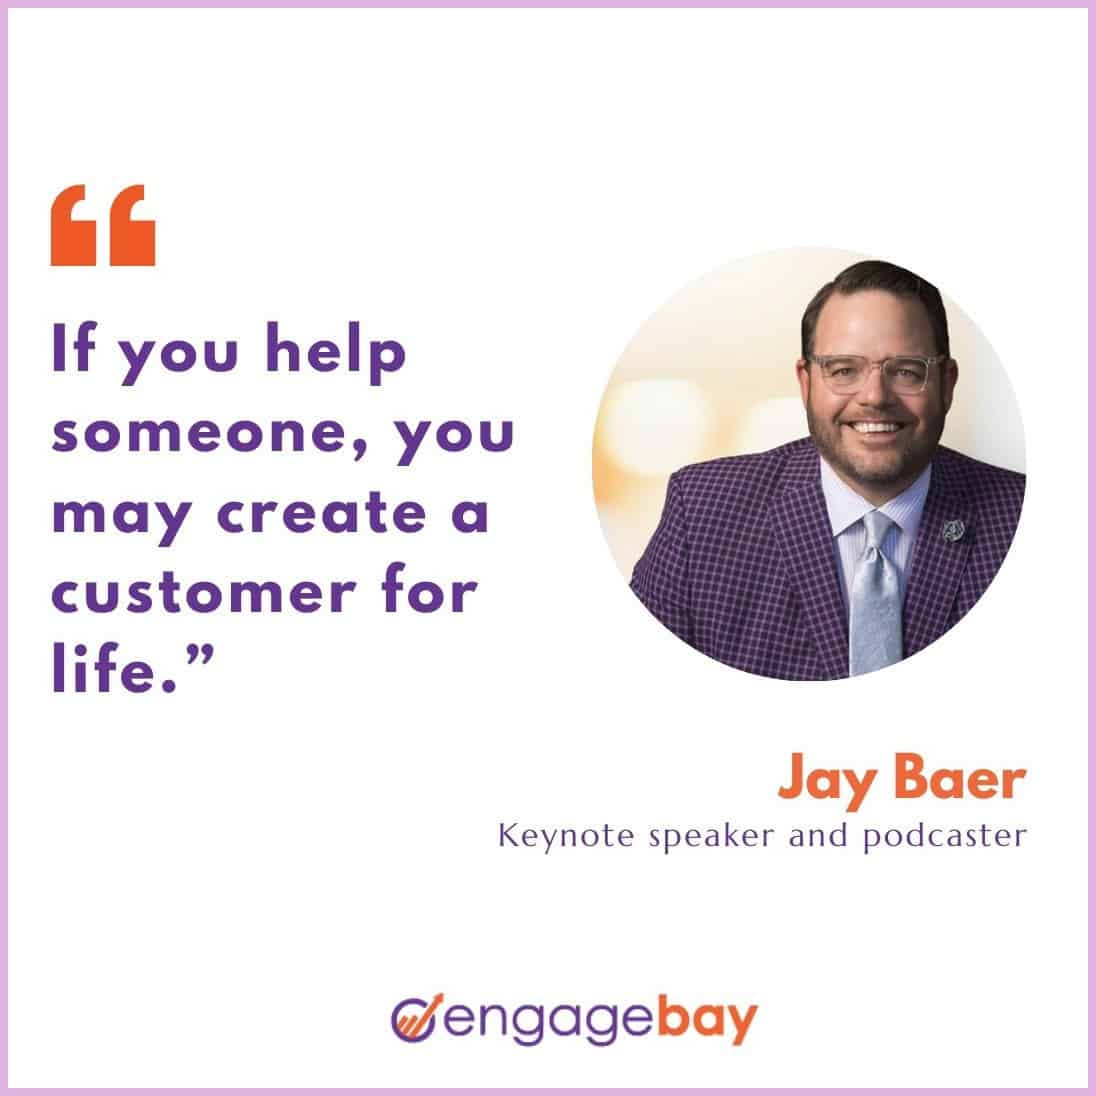 Jay Baer quotes